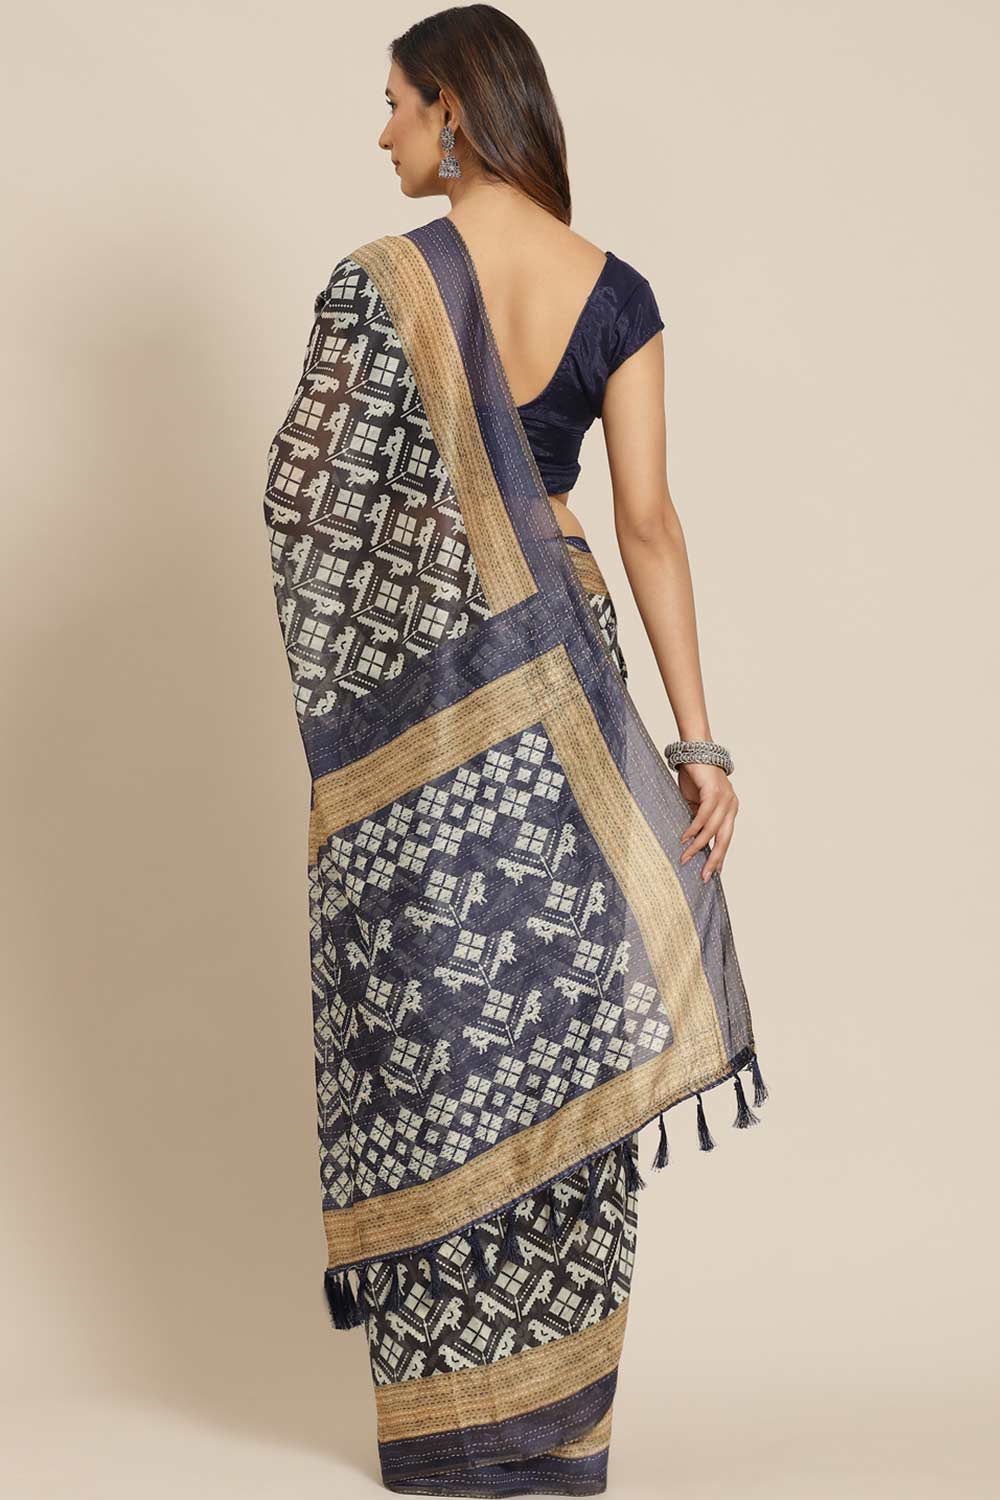 Shop Morah Black Cotton Block Printed One Minute Saree at best offer at our  Store - One Minute Saree